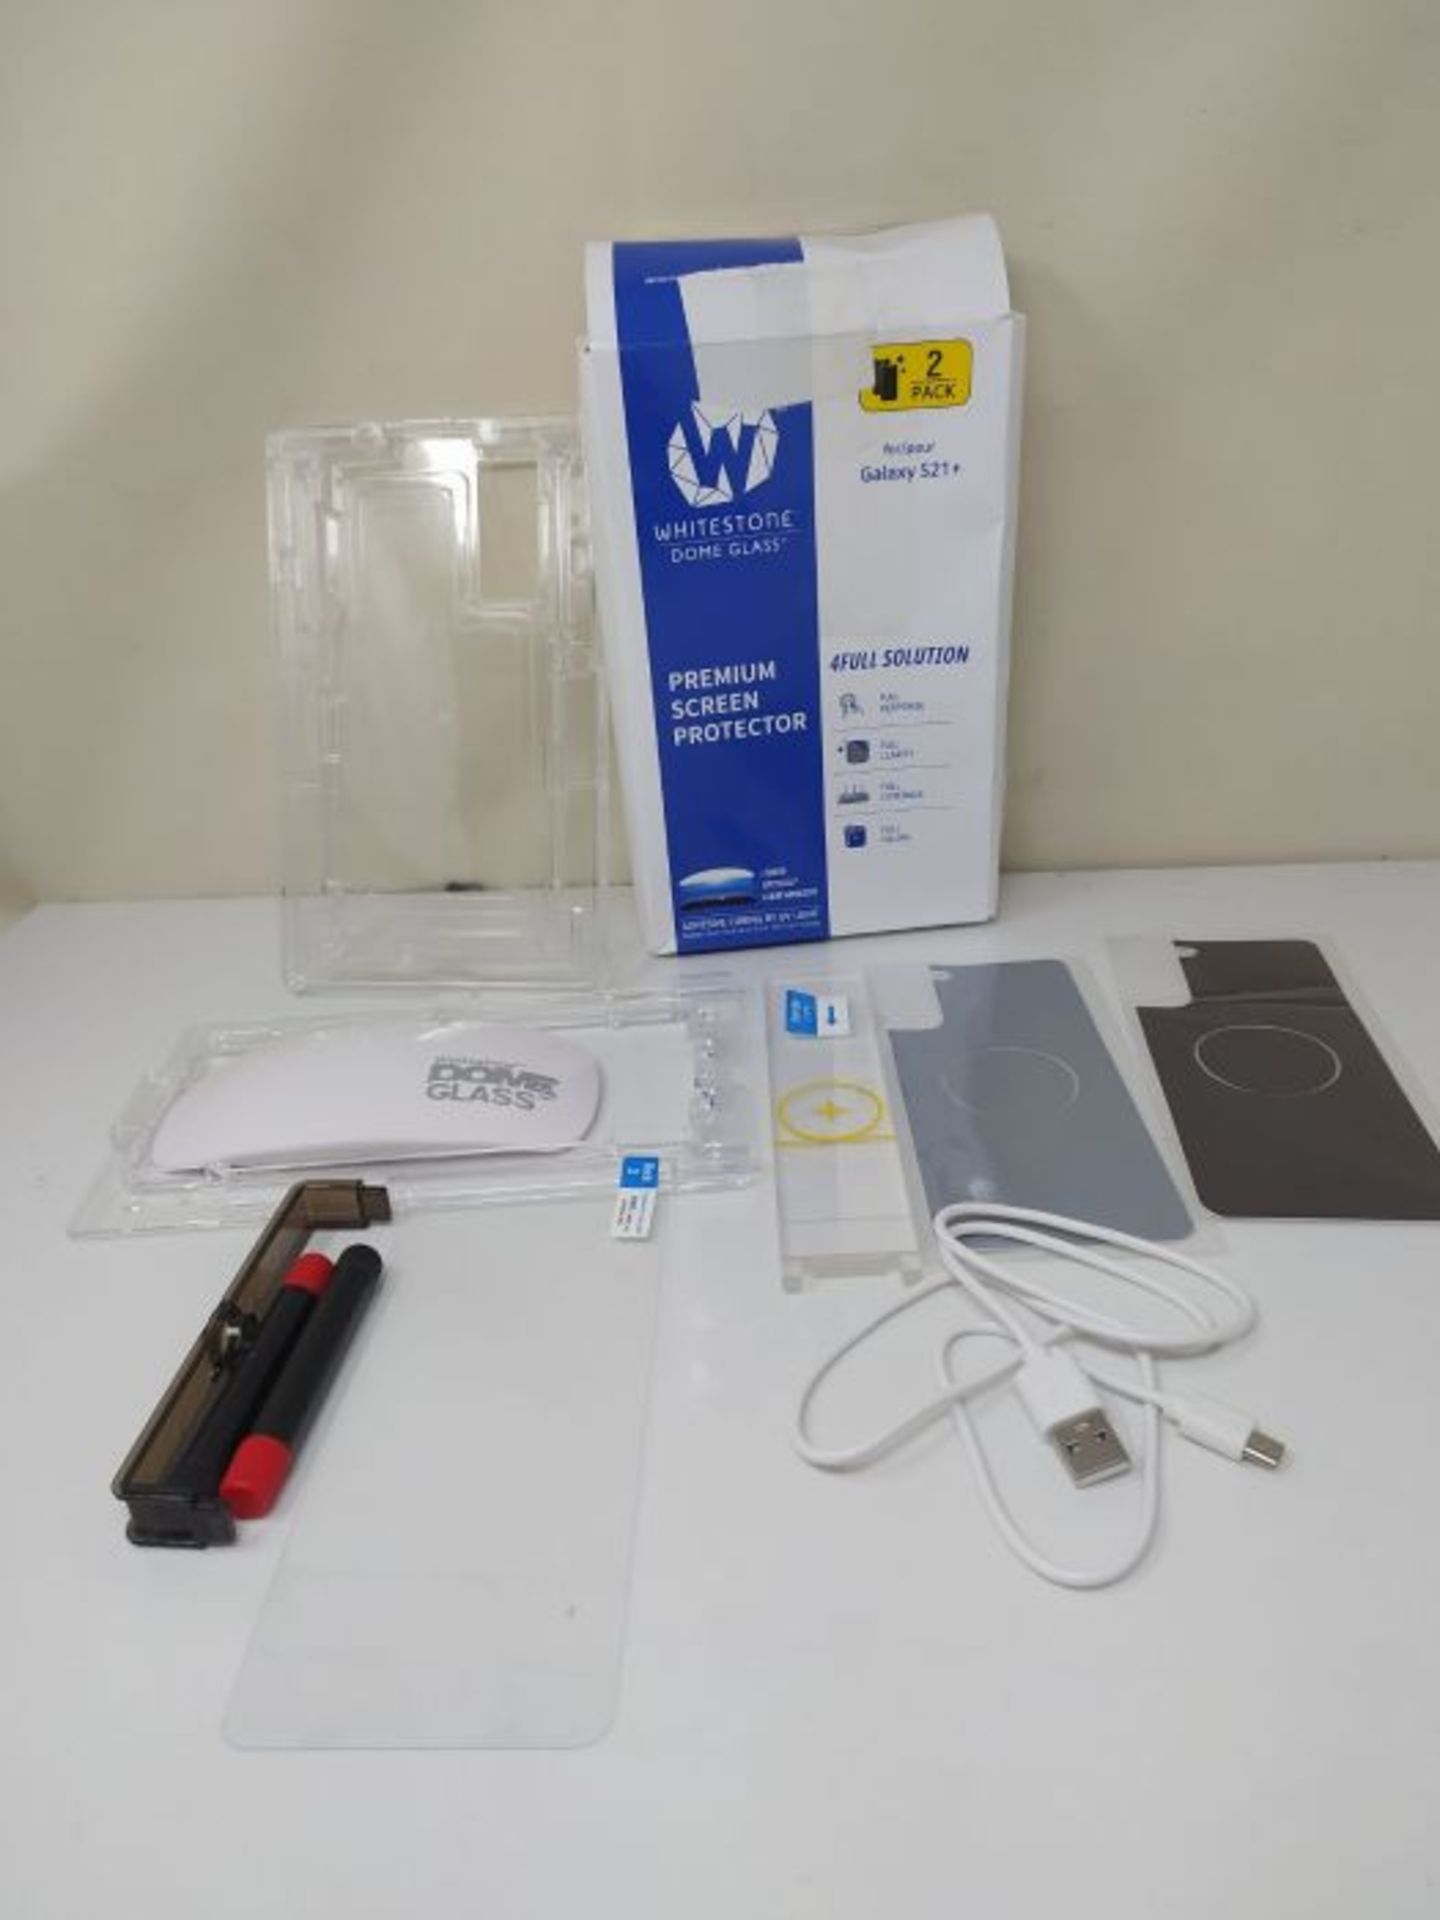 [Dome Glass] Galaxy S21 Plus Screen Protector, Full HD Clear 3D Curved Edge Tempered G - Image 2 of 2